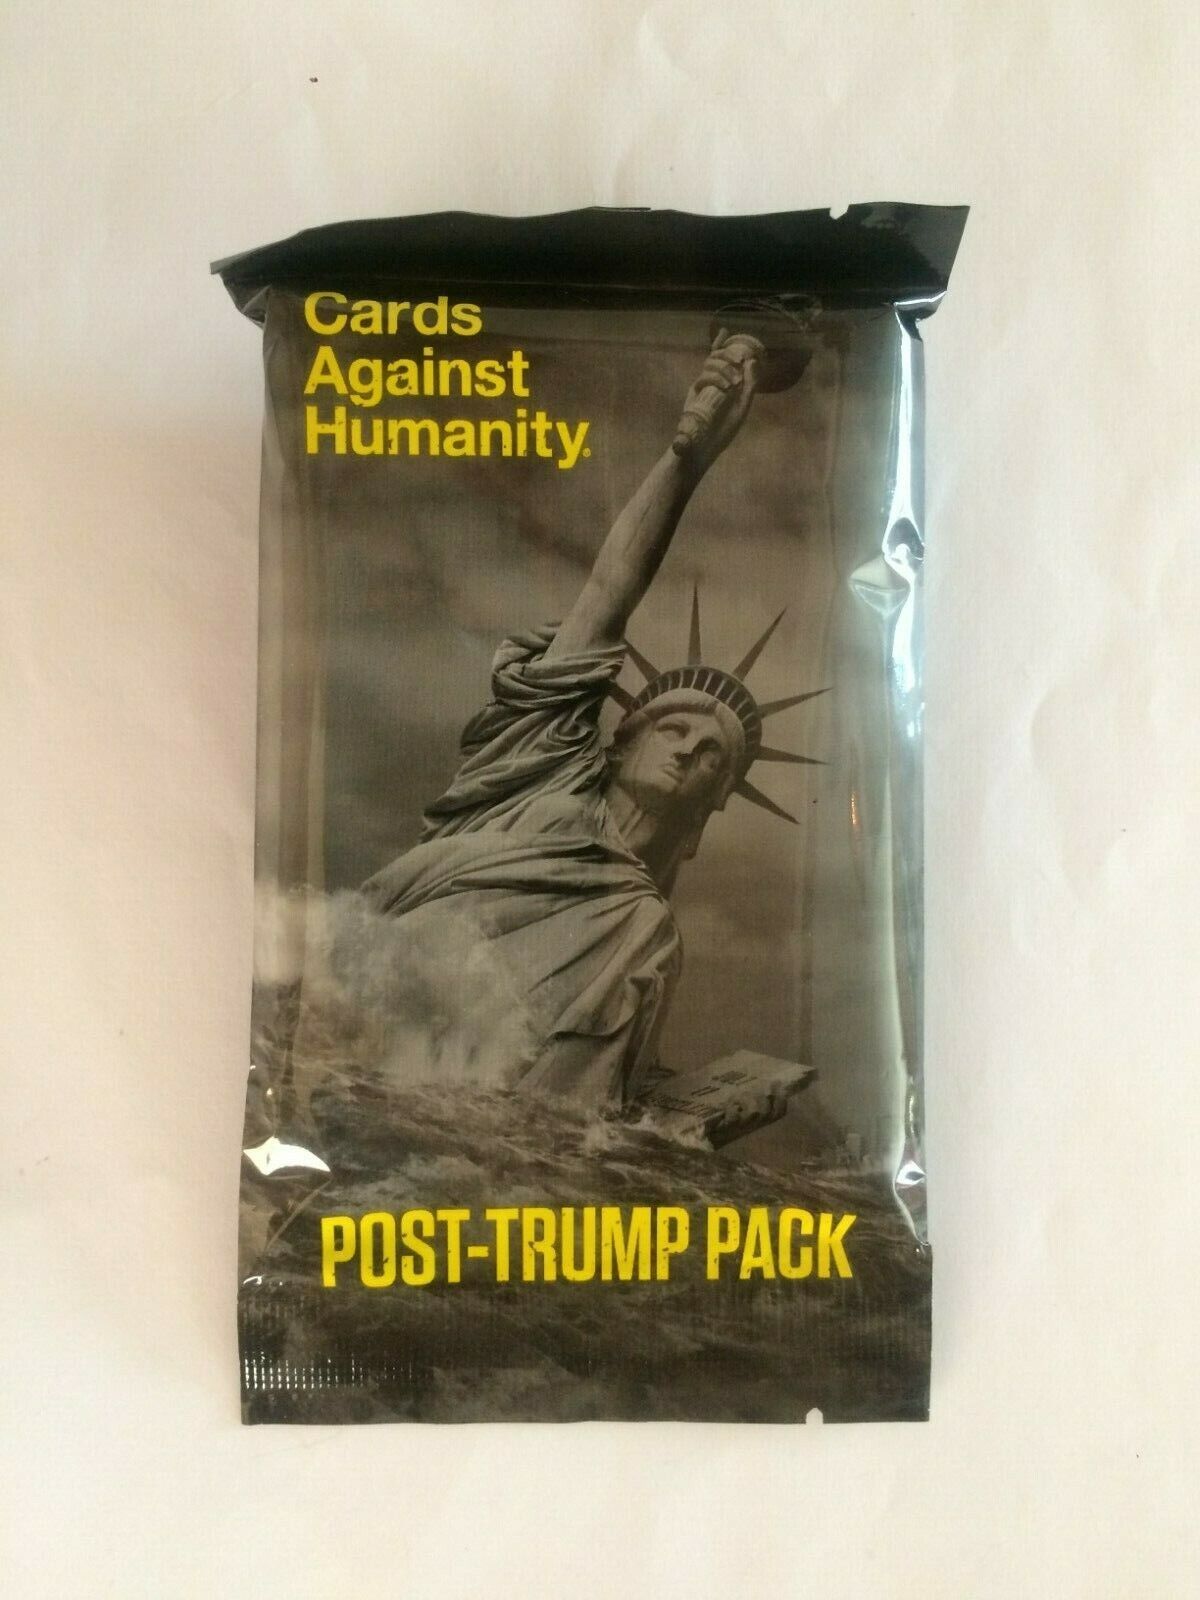 Cards Against Humanity 1996  POST - TRUMP Expansion Pack   New  never opened